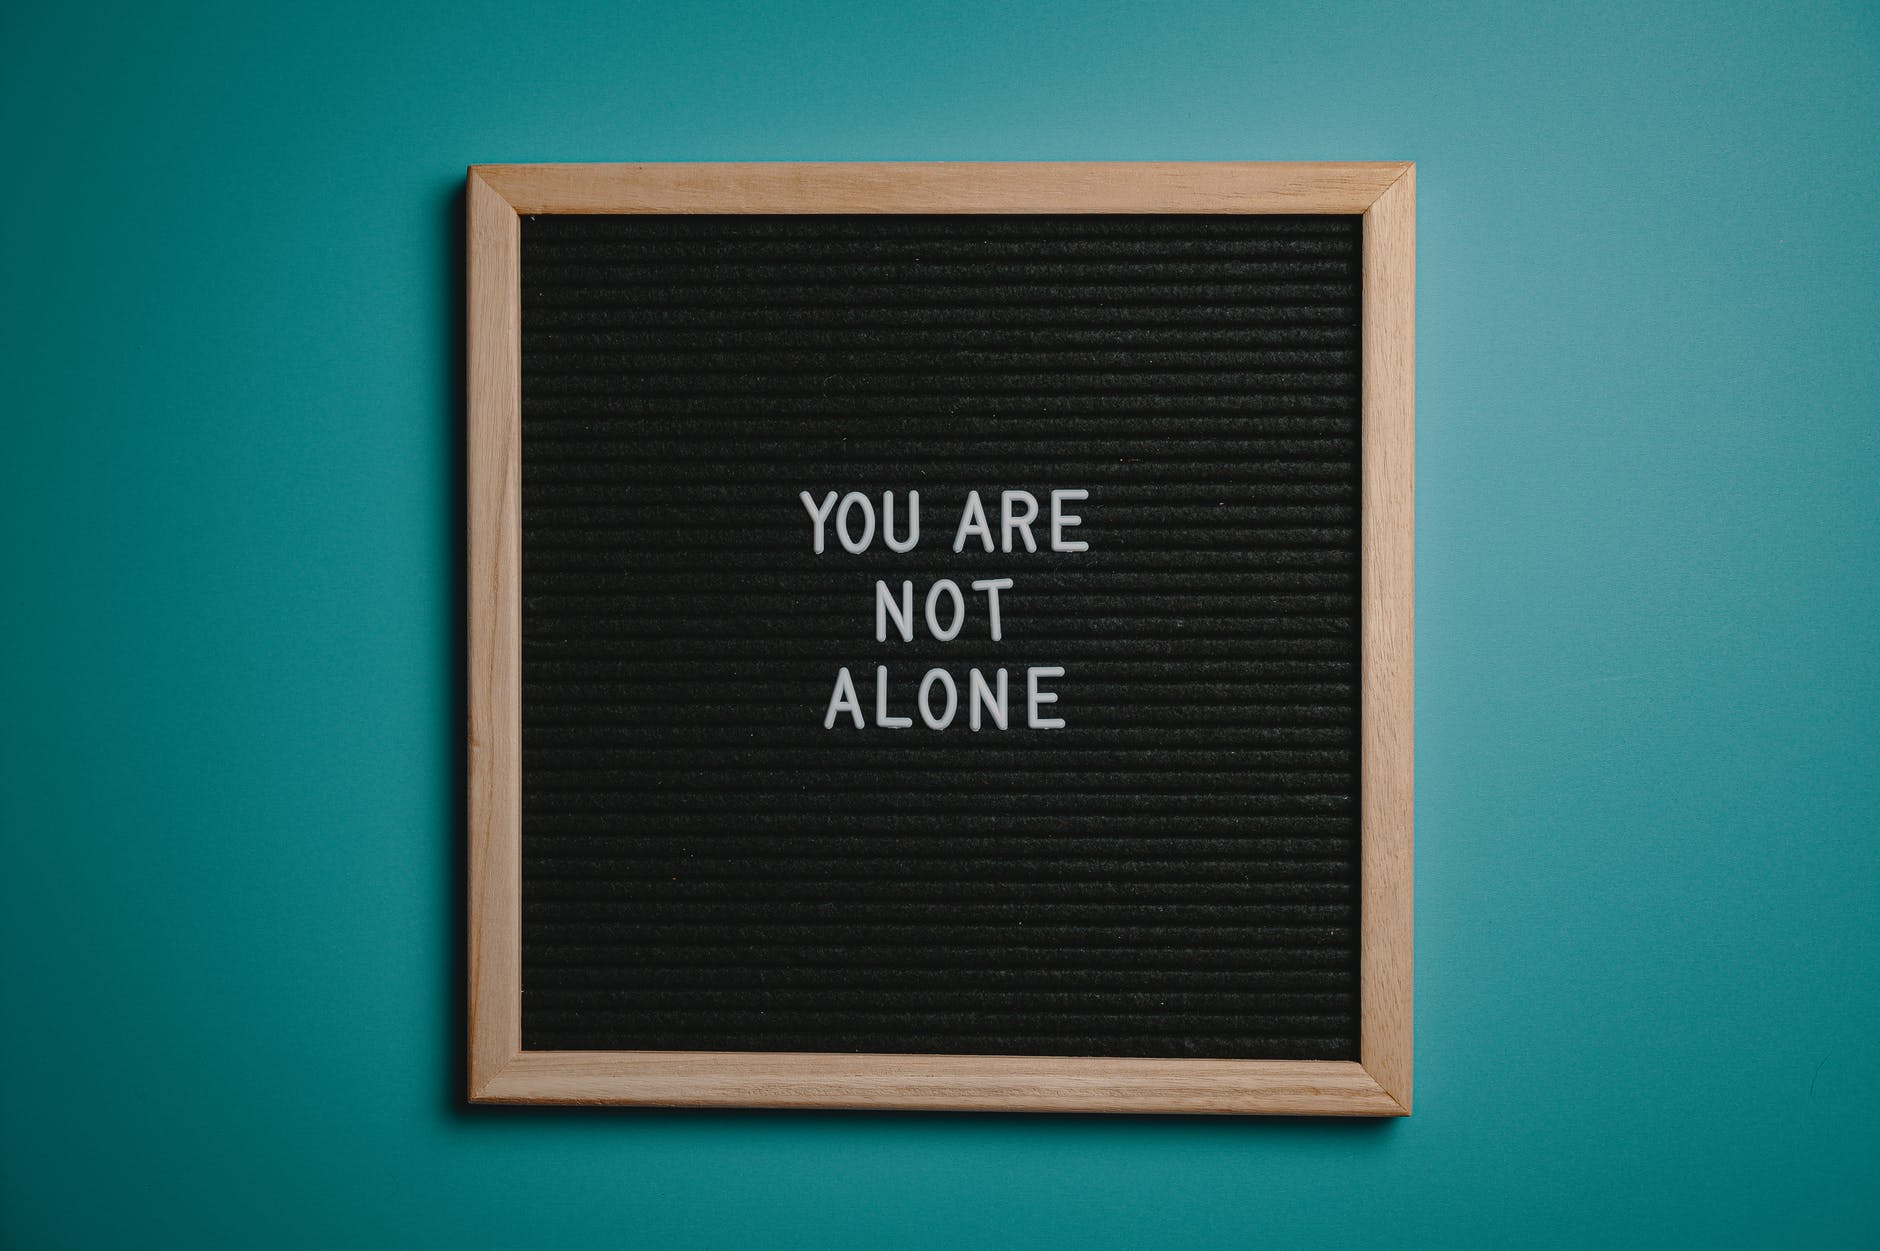 you are not alone quote board on brown wooden frame